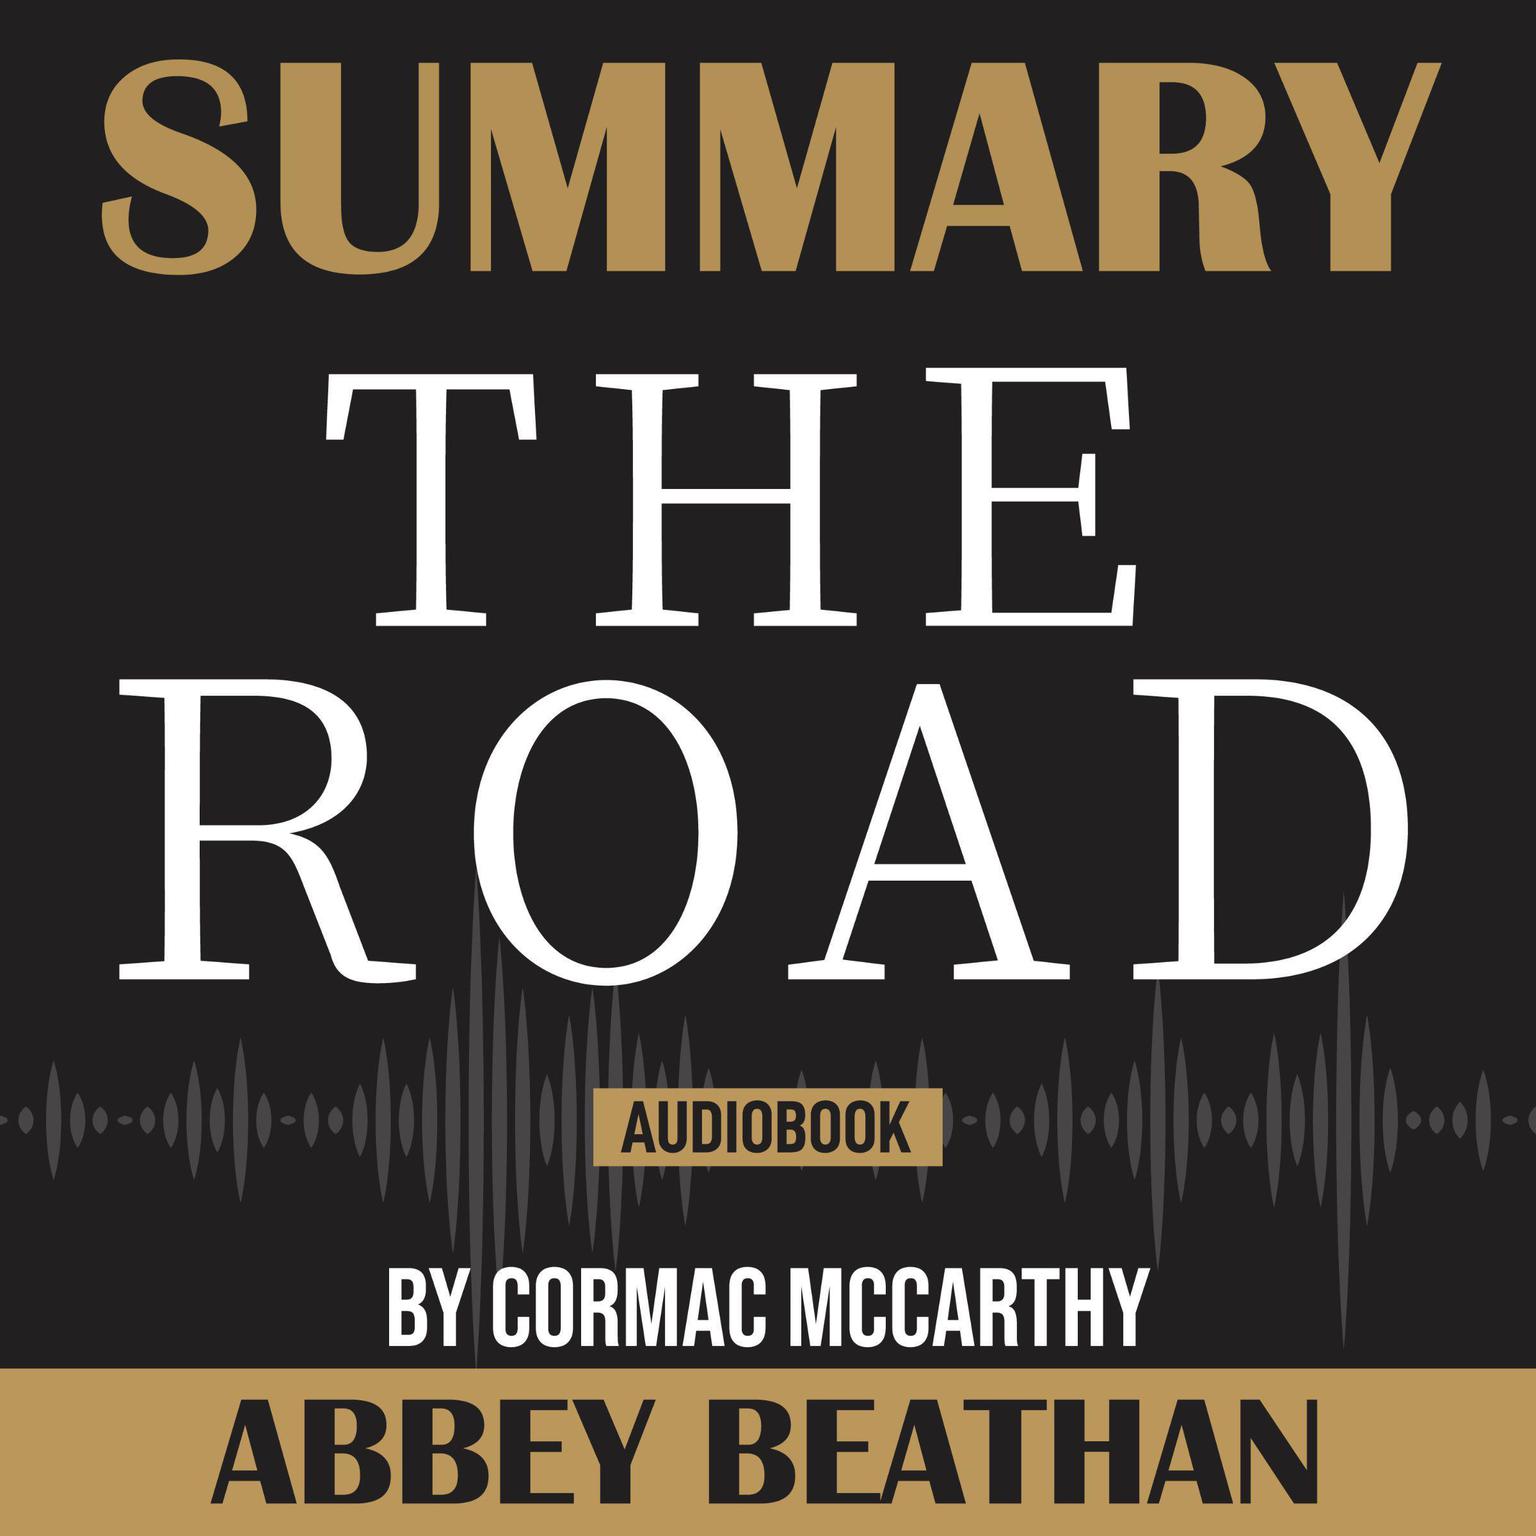 Summary of The Road by Cormac McCarthy Audiobook, by Abbey Beathan